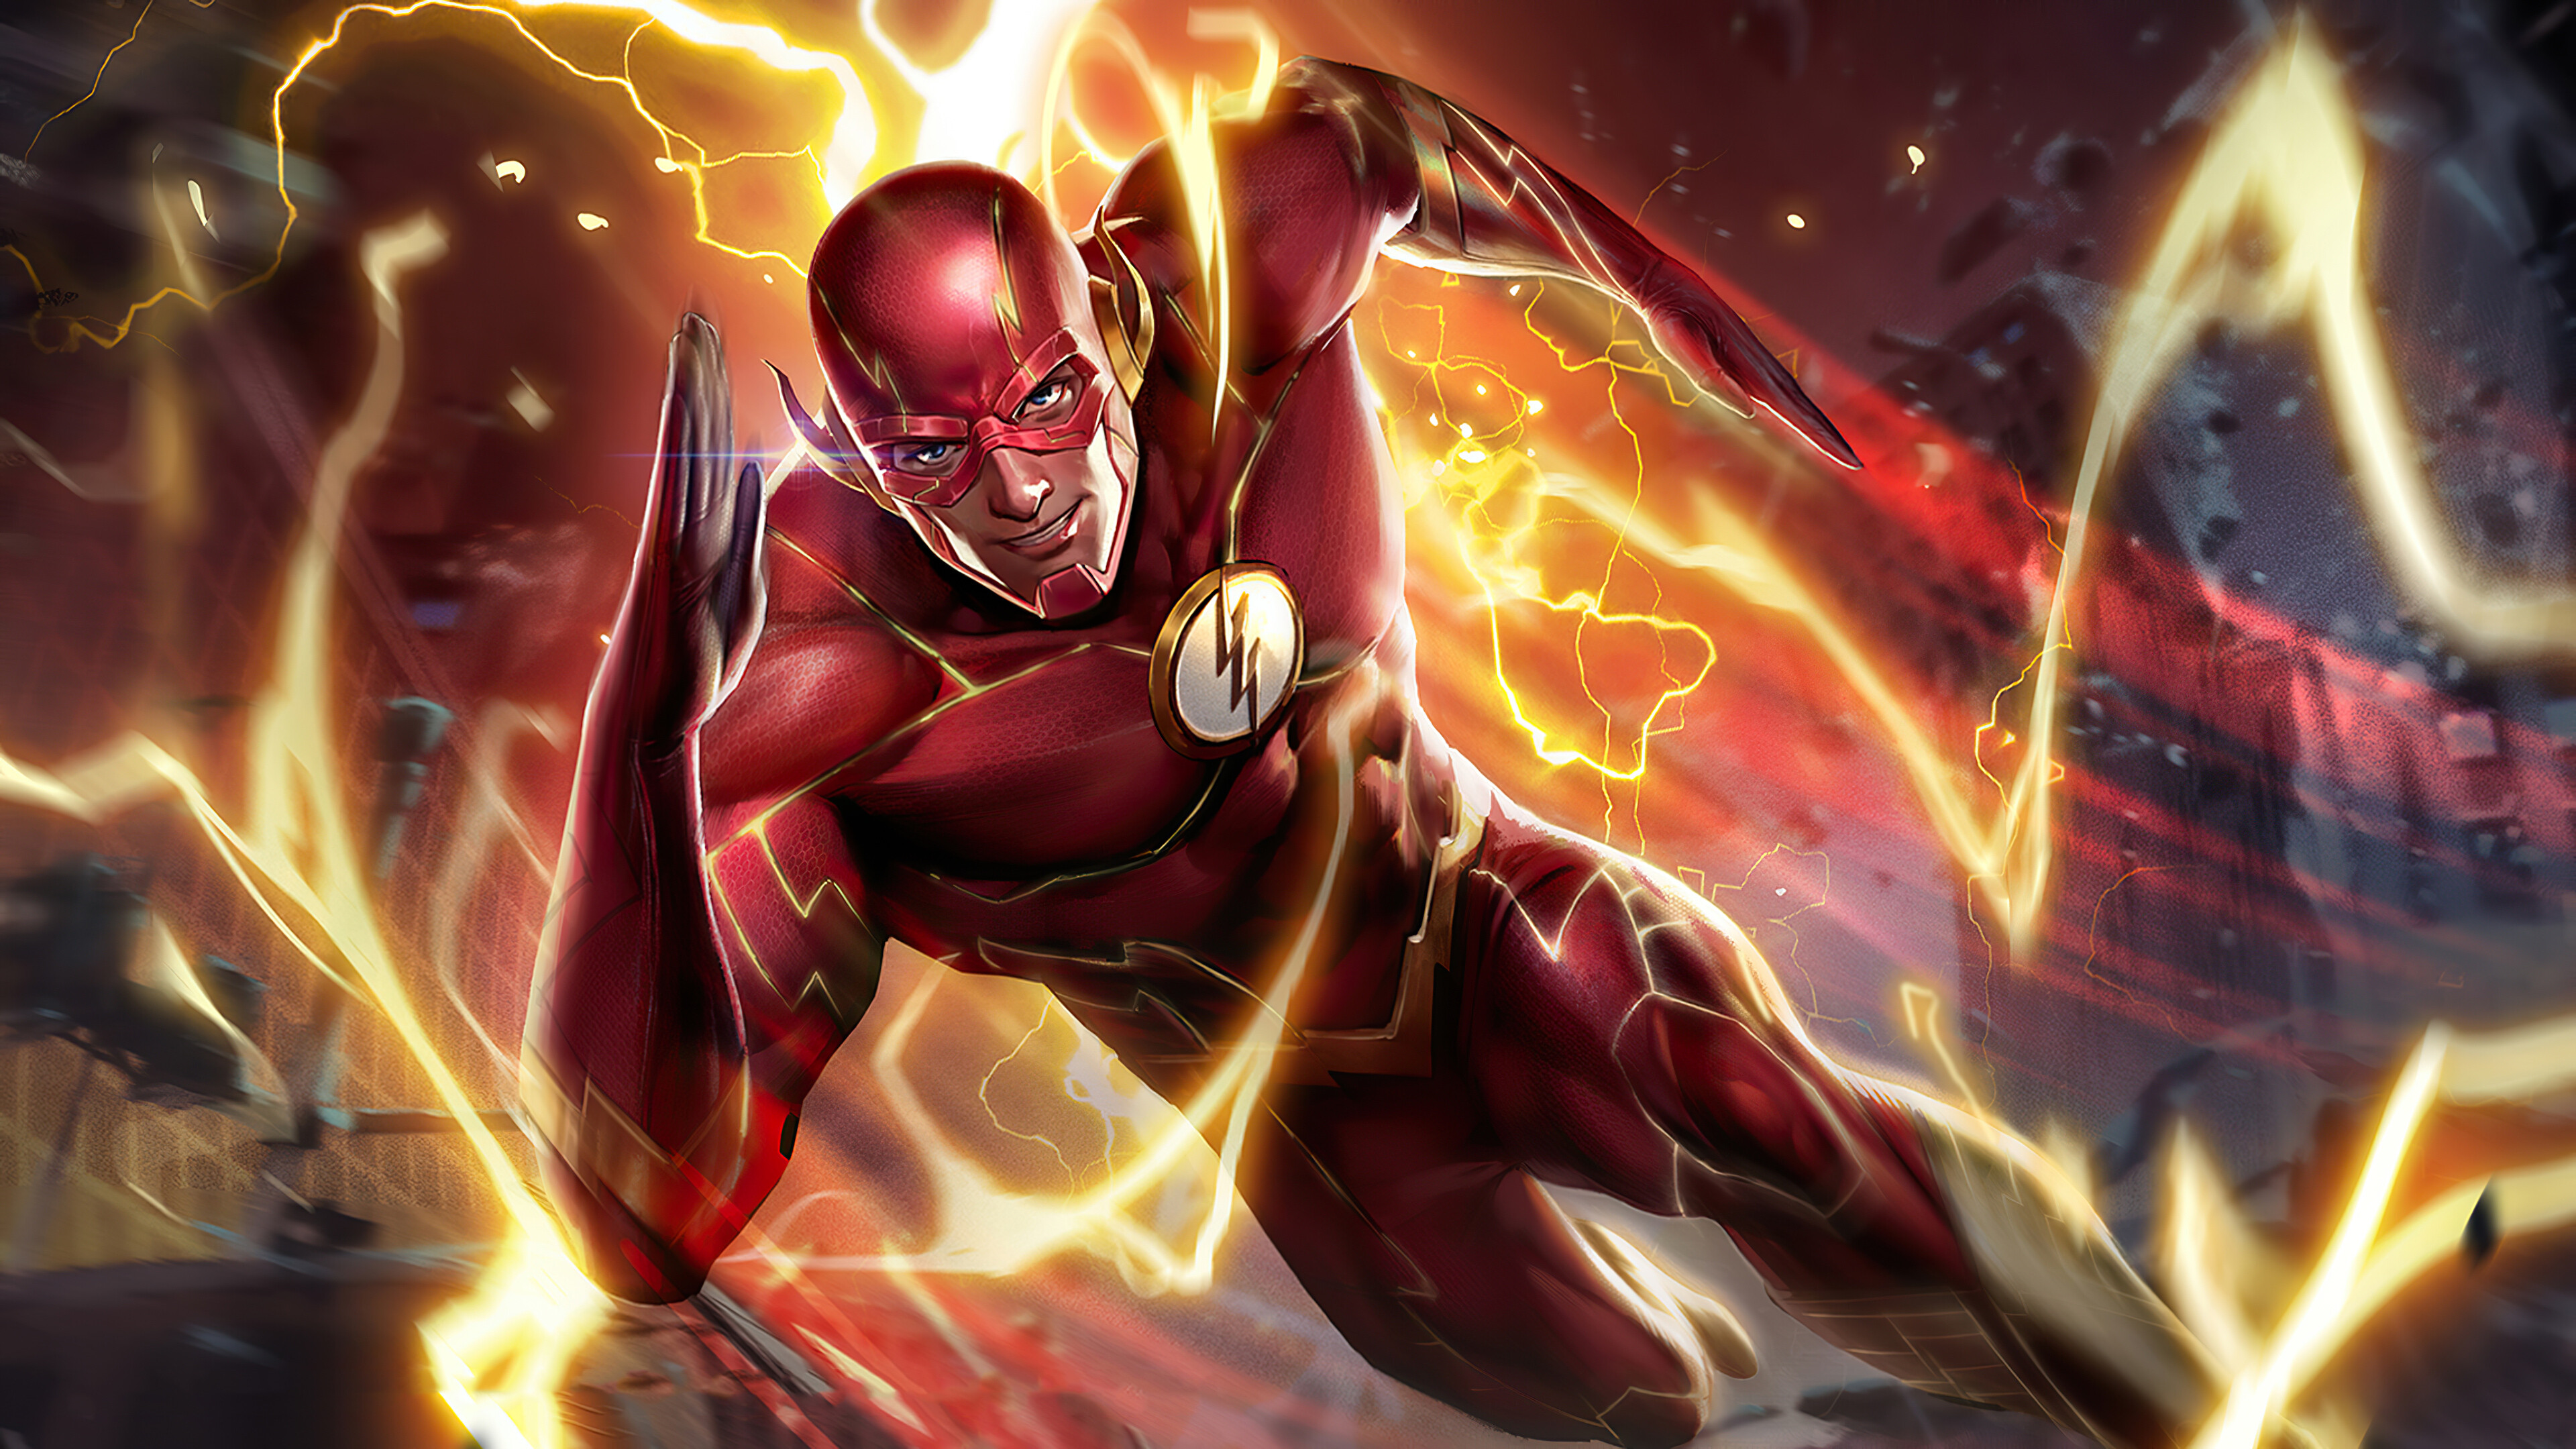 Flash (DC): Barry Allen, A founding member of the Justice League. 3840x2160 4K Wallpaper.